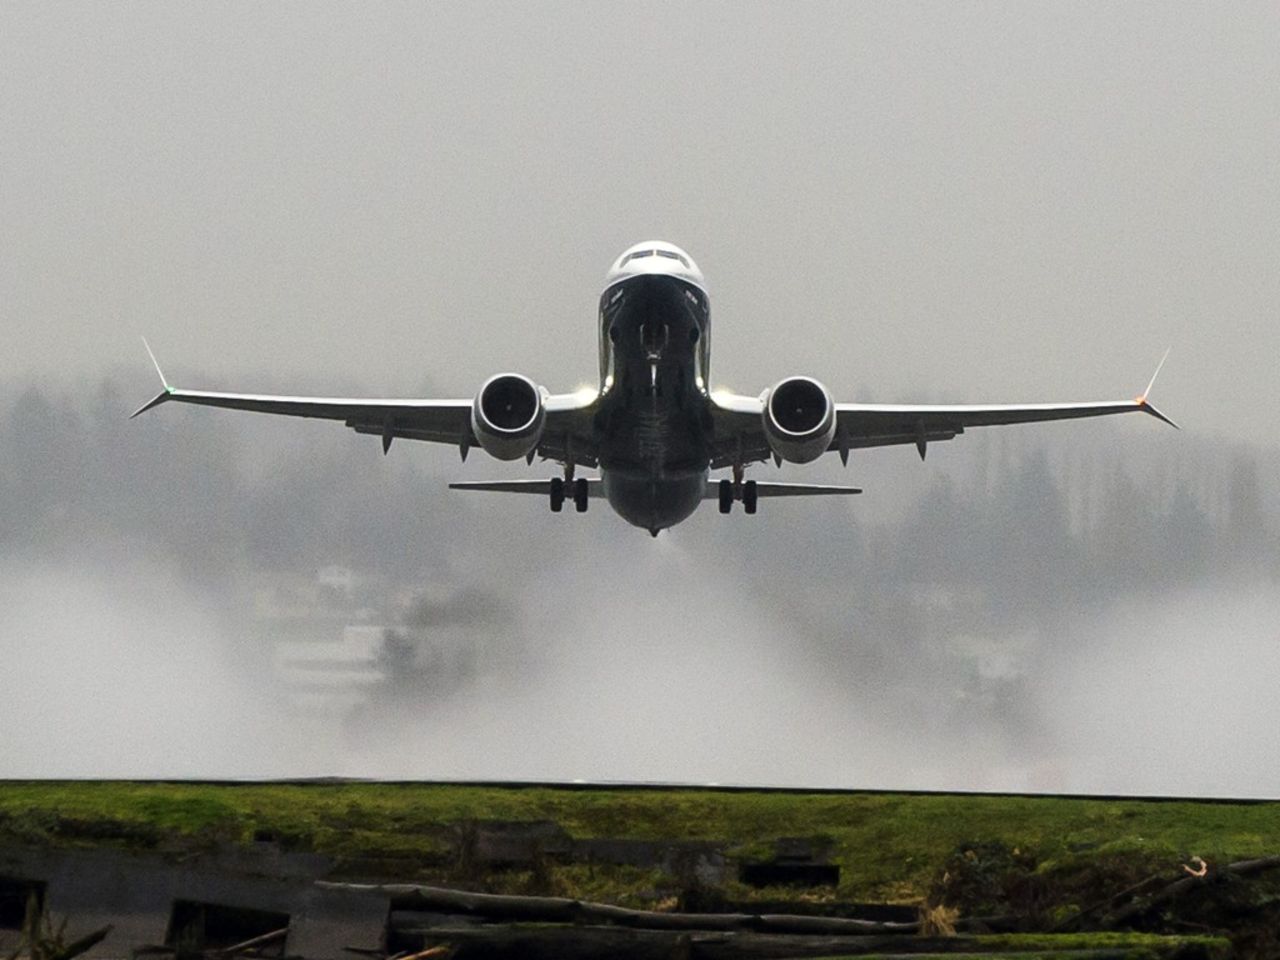 Skies were cloudy, but the mood was bright after the 737 MAX's successful first flight.